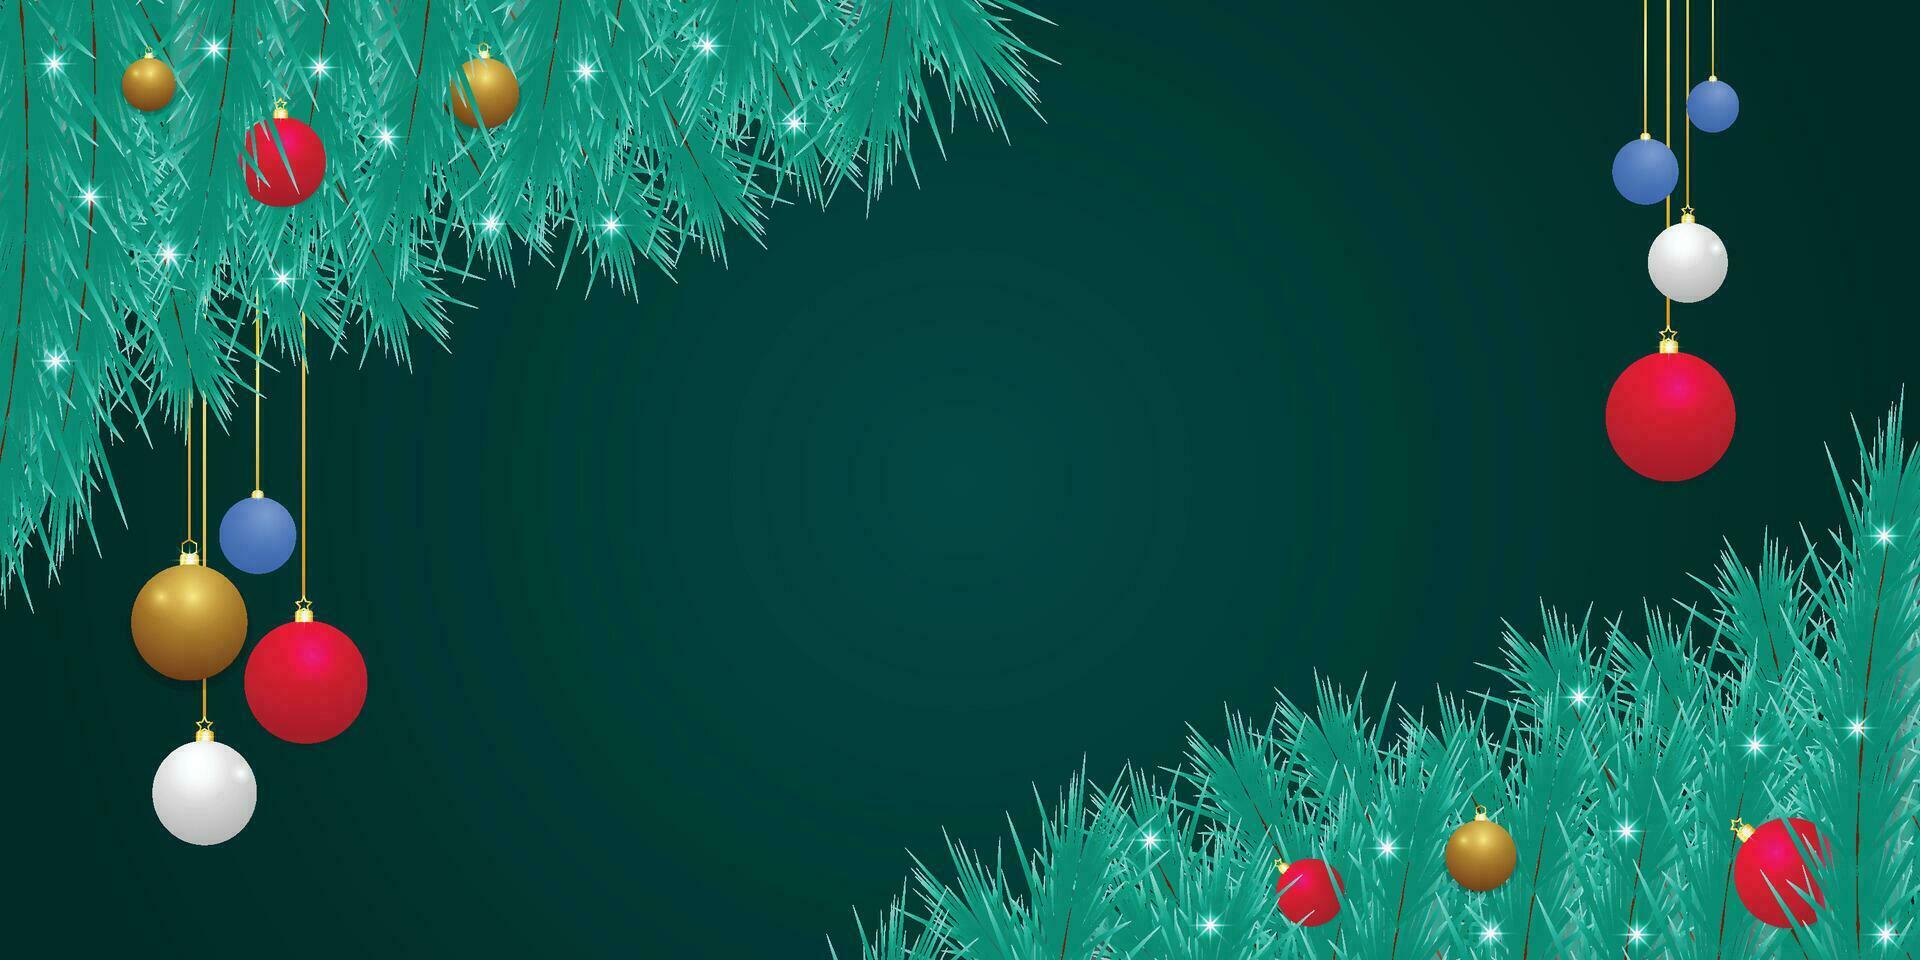 Realistic Christmas green leaf banner with red and white balls with lights and black blue background. vector